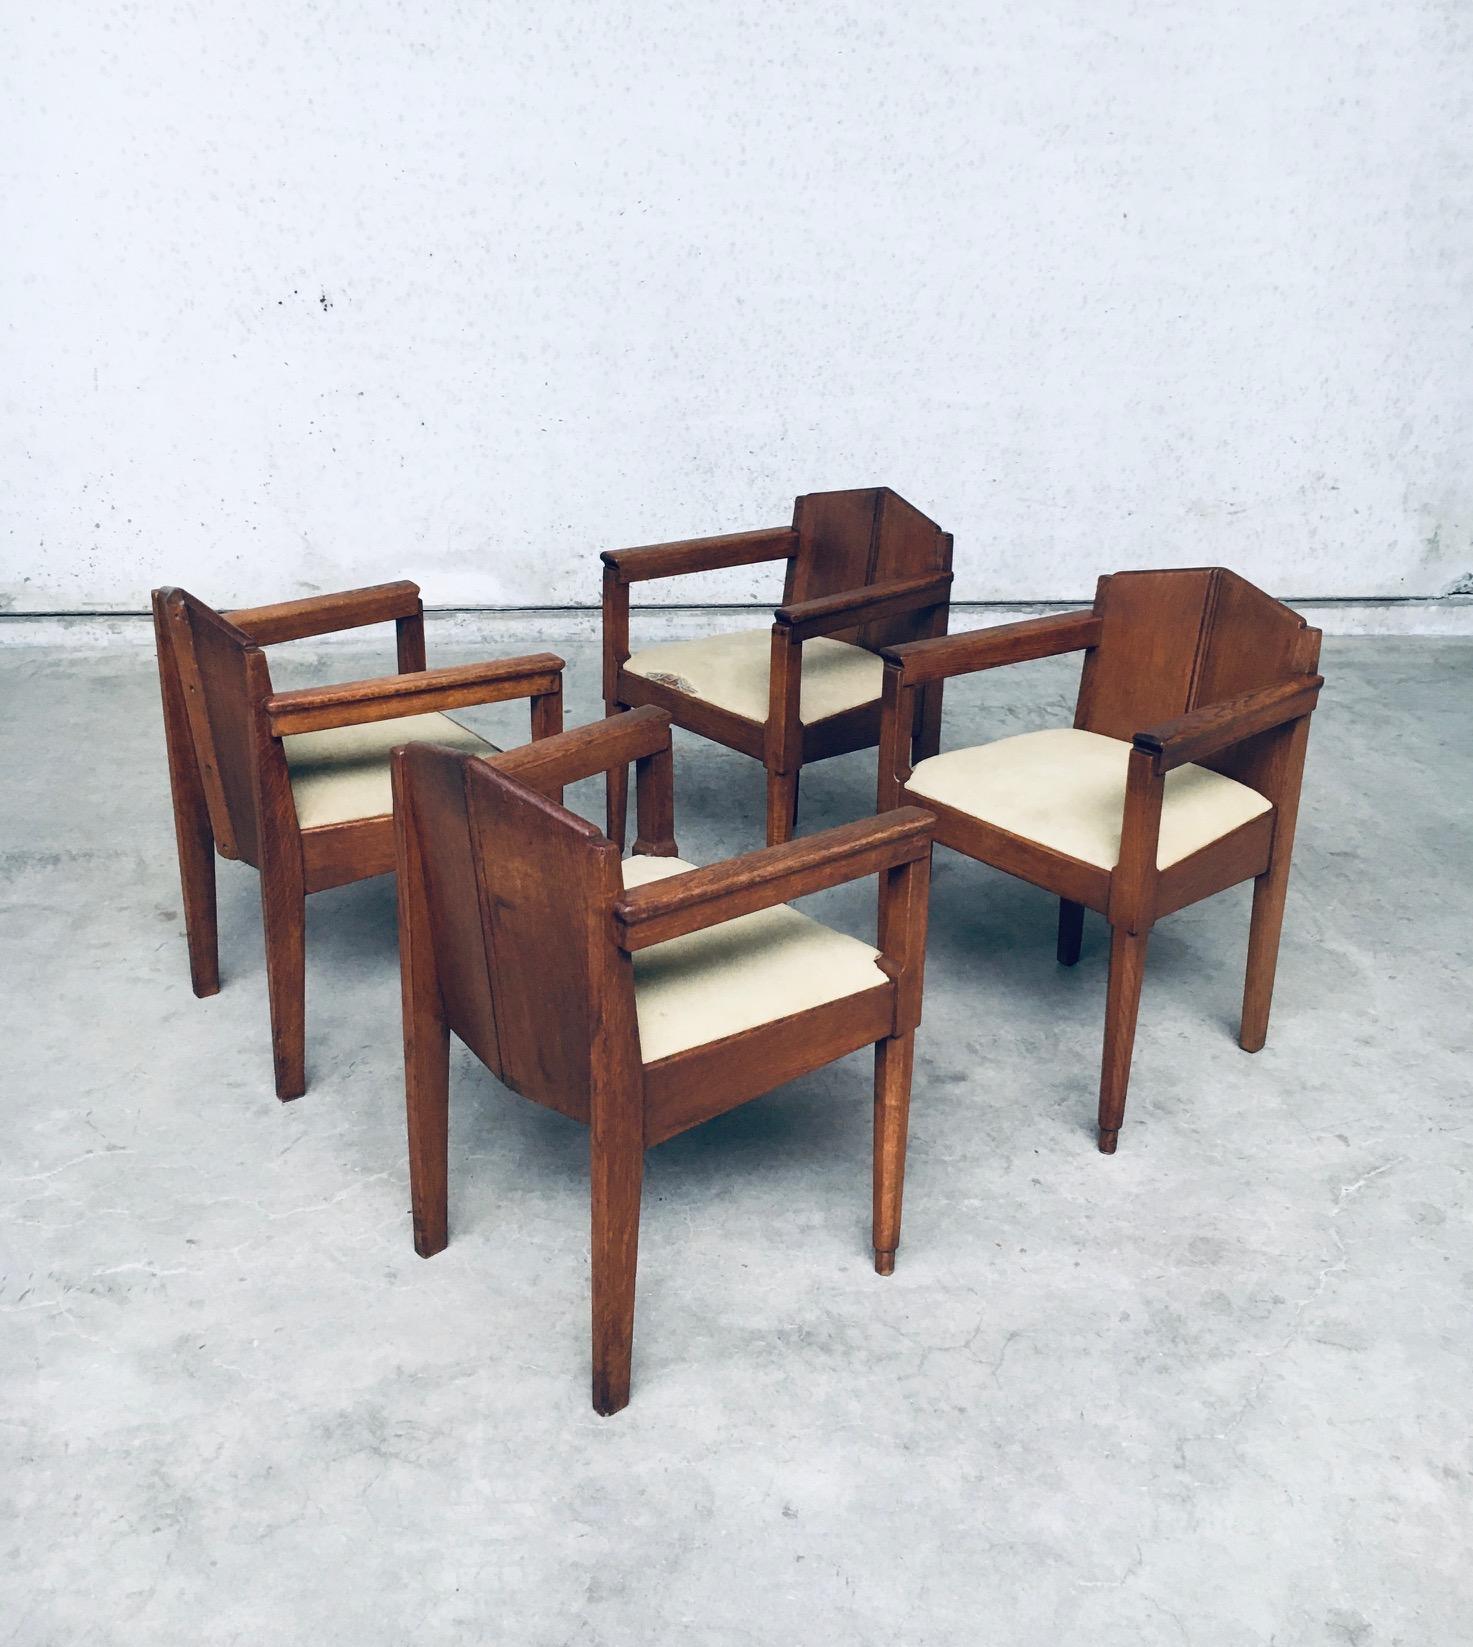 Early 20th Century 1910's Dutch Modernism Design Amsterdam School Dining Chair set For Sale